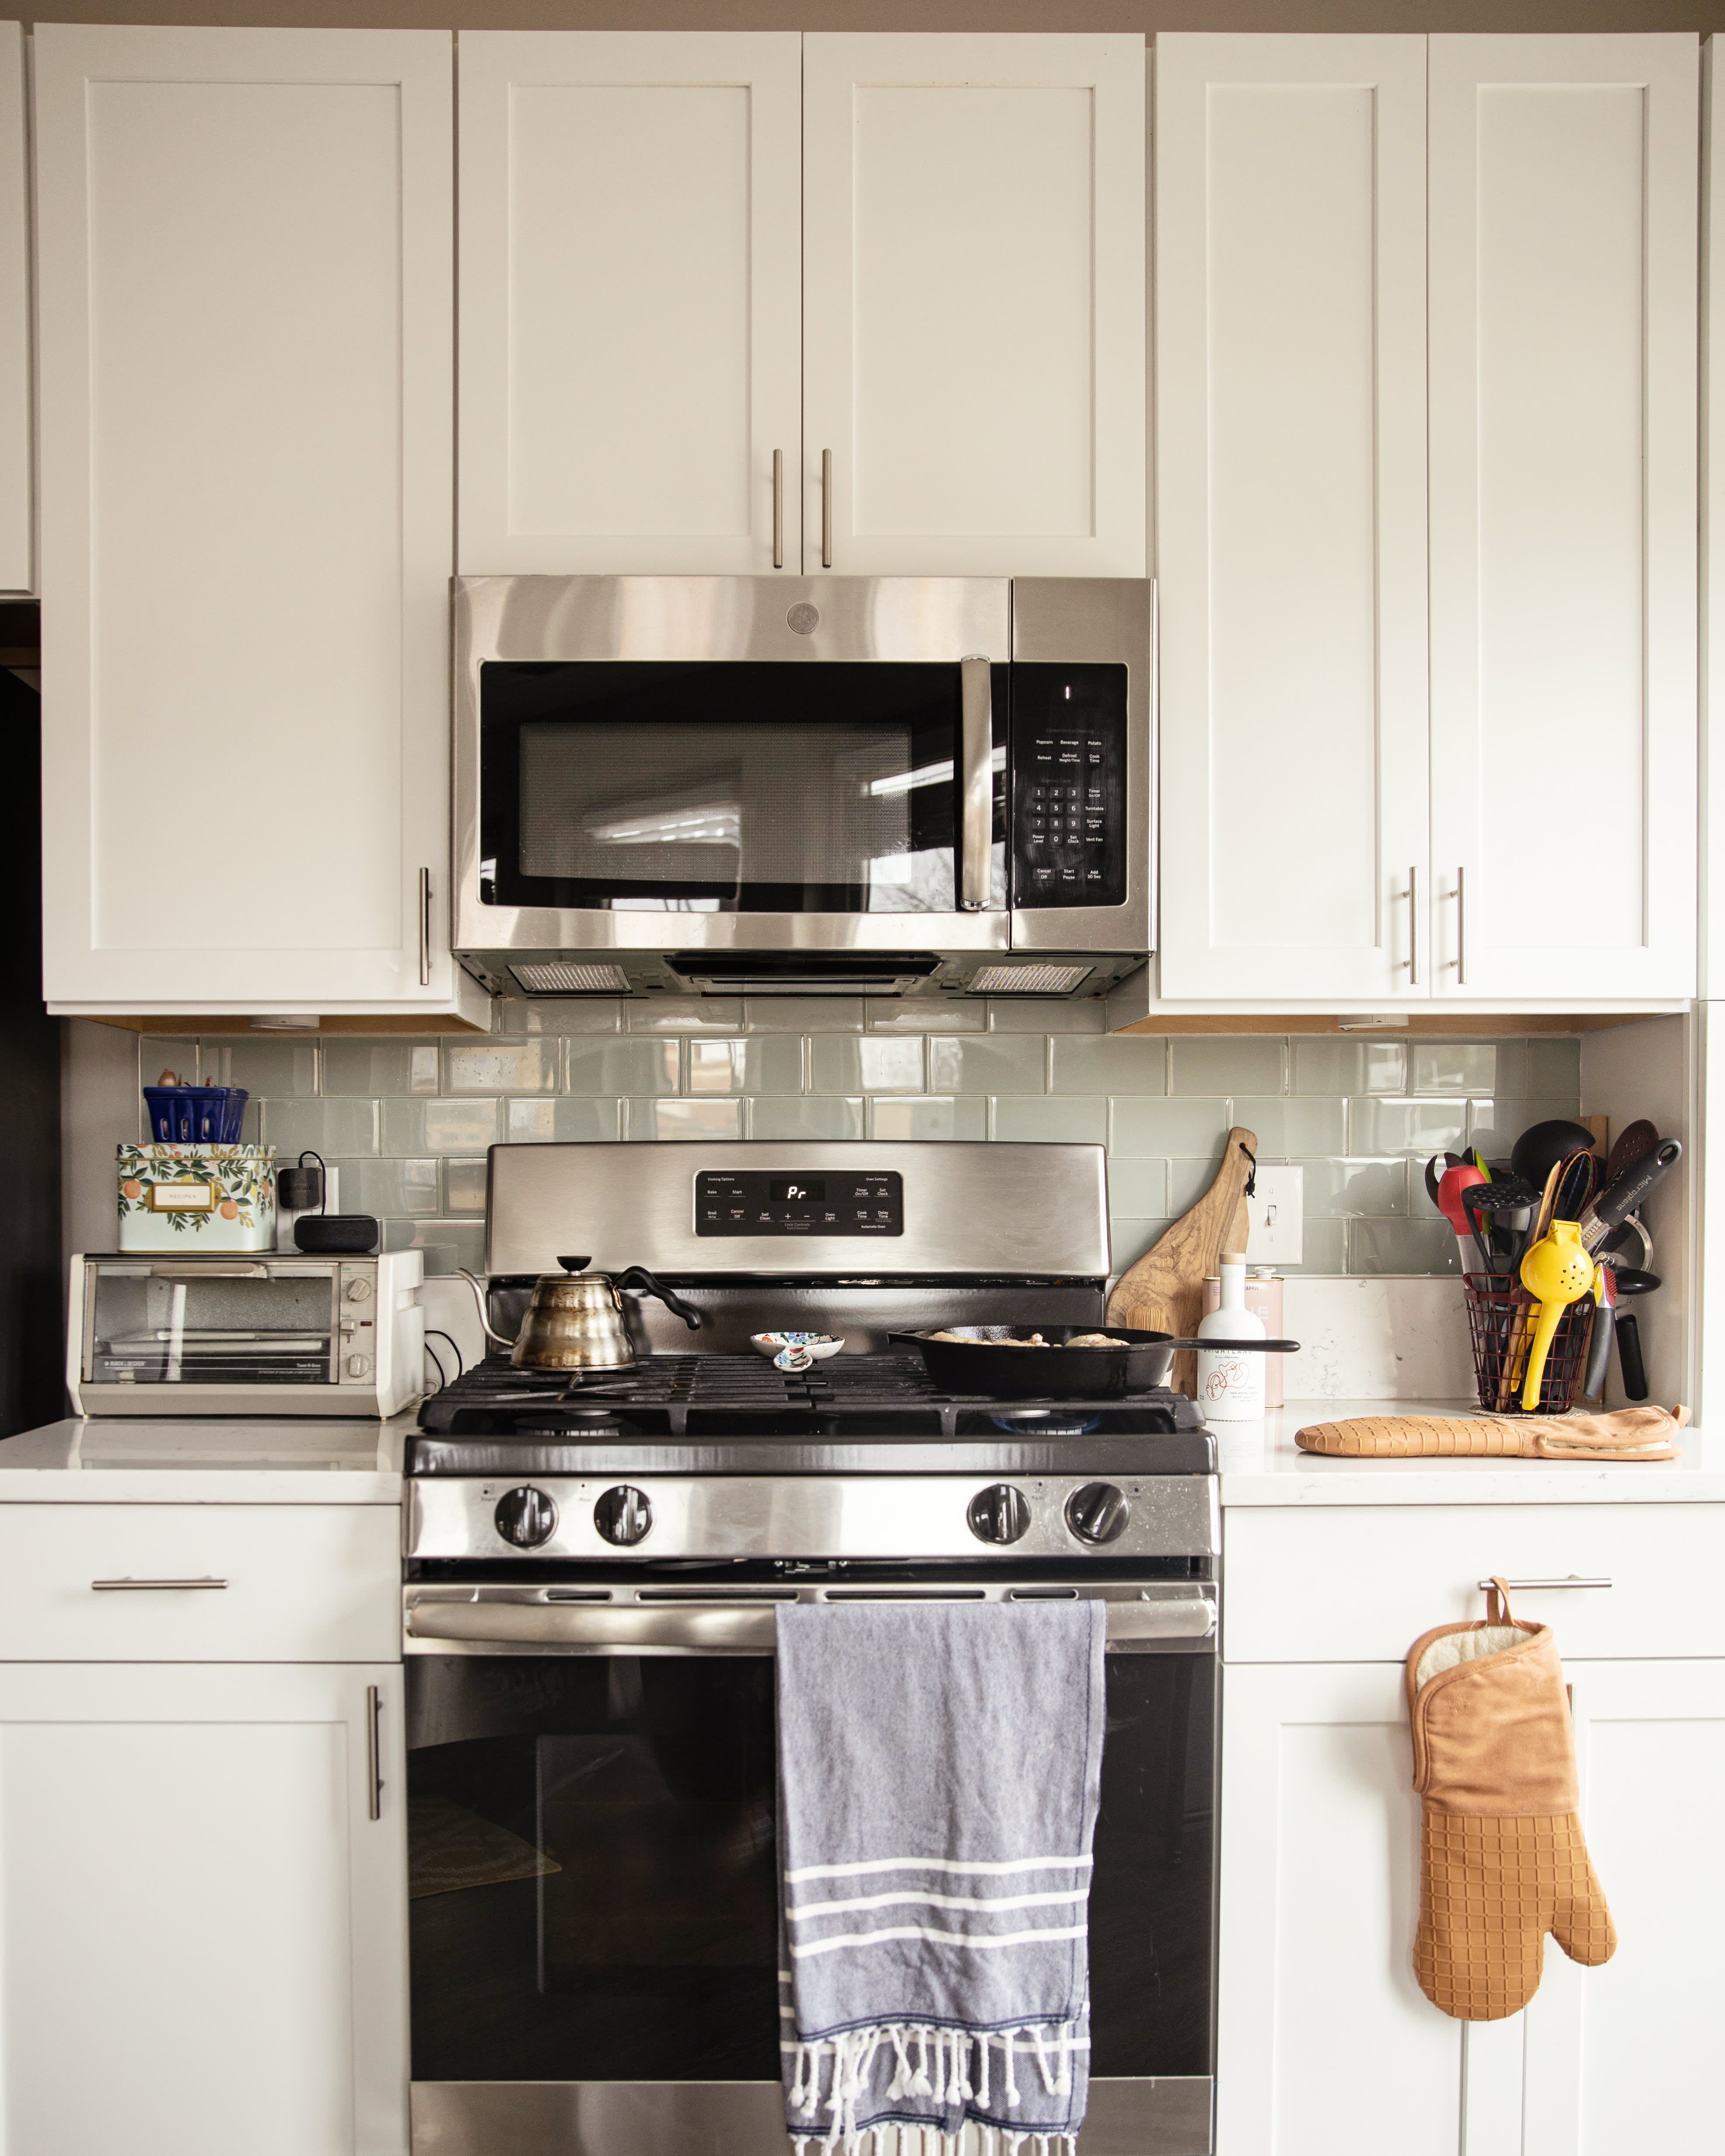 5 Compact Kitchen Appliances To Save Space In The Kitchen